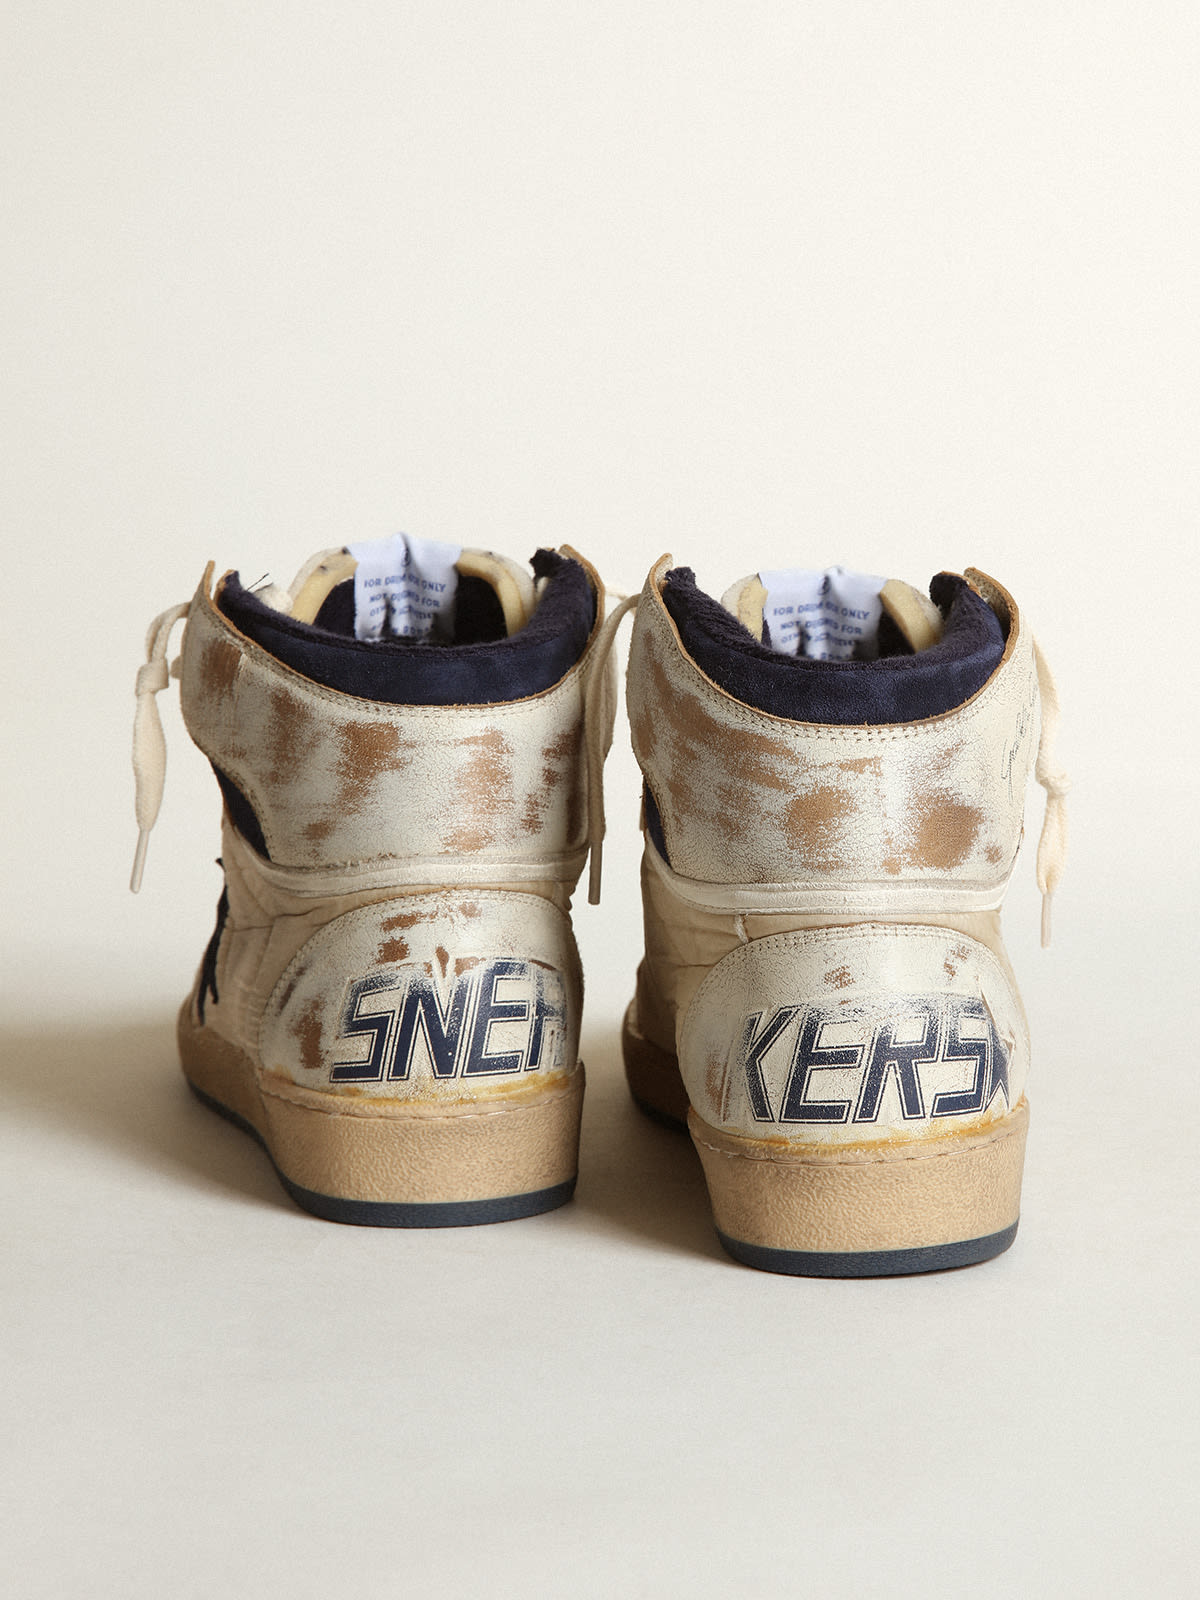 Golden Goose - Men's Sky-Star in cream-colored nylon and leather with blue suede star in 